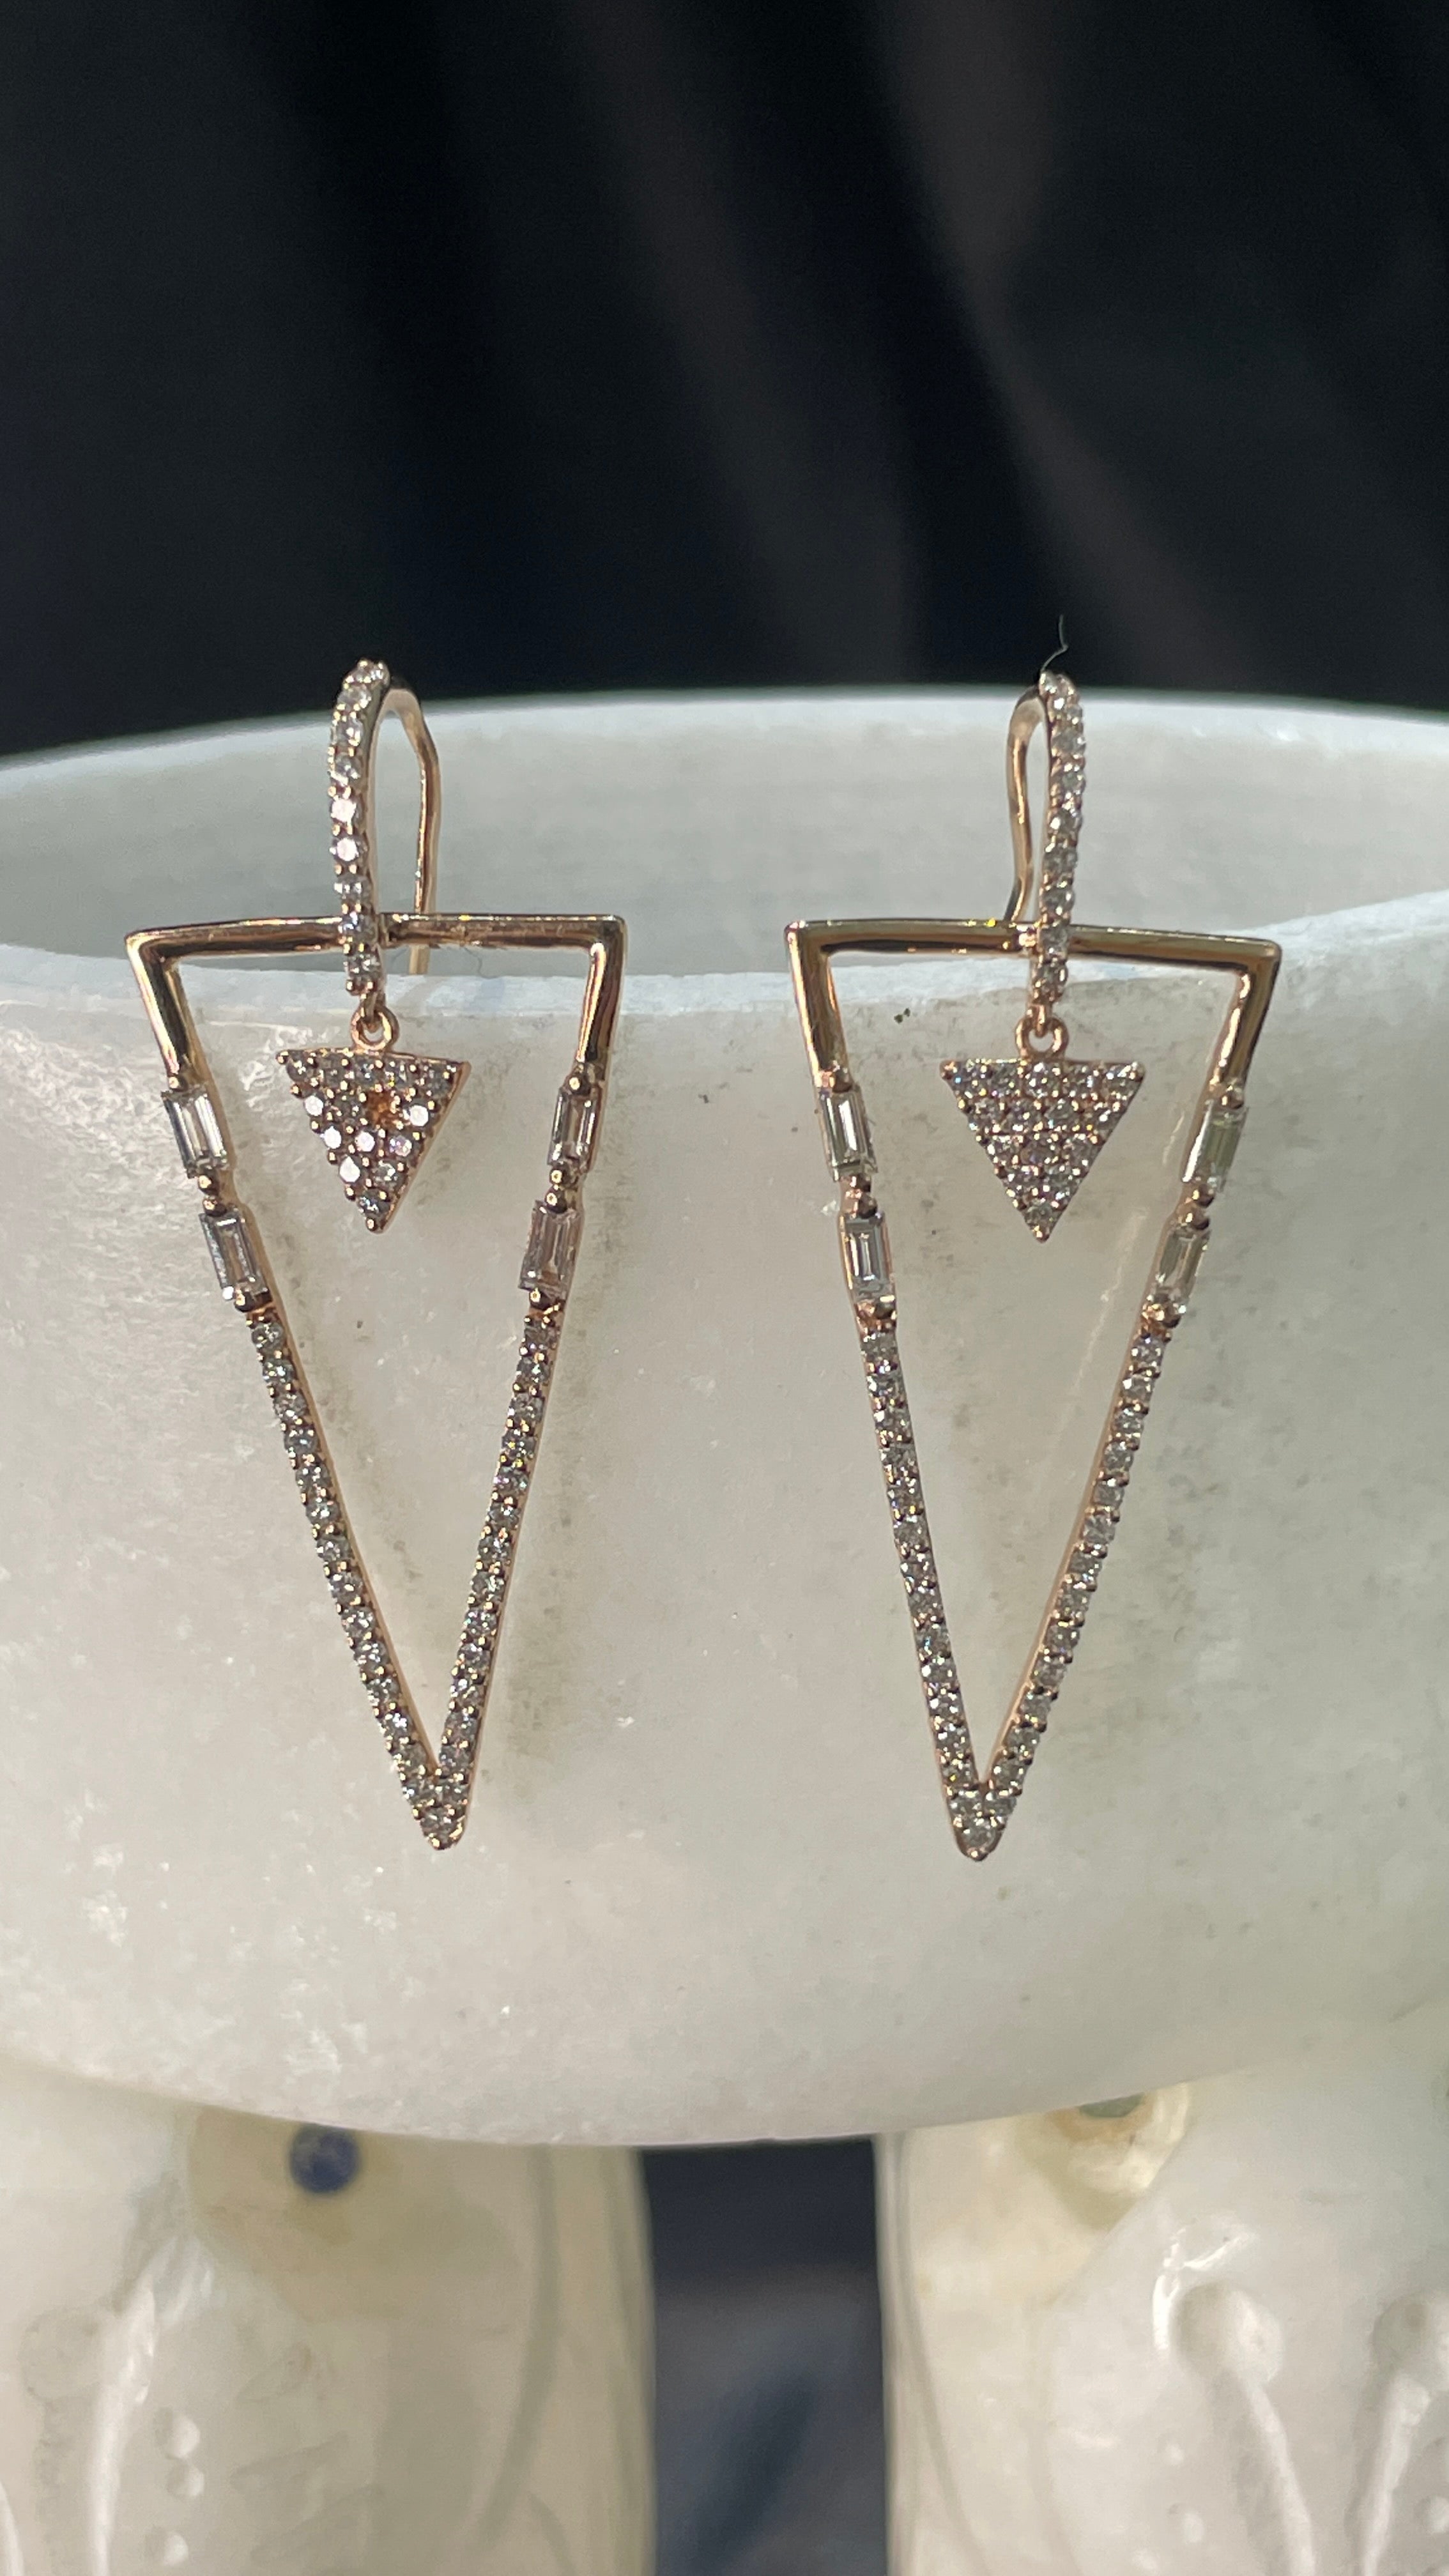 Modern Diamond Earrings in 14K Gold to make a statement with your look. You shall need dangle earrings to make a statement with your look. These earrings create a sparkling, luxurious look featuring round cut diamonds .
April birthstone diamond